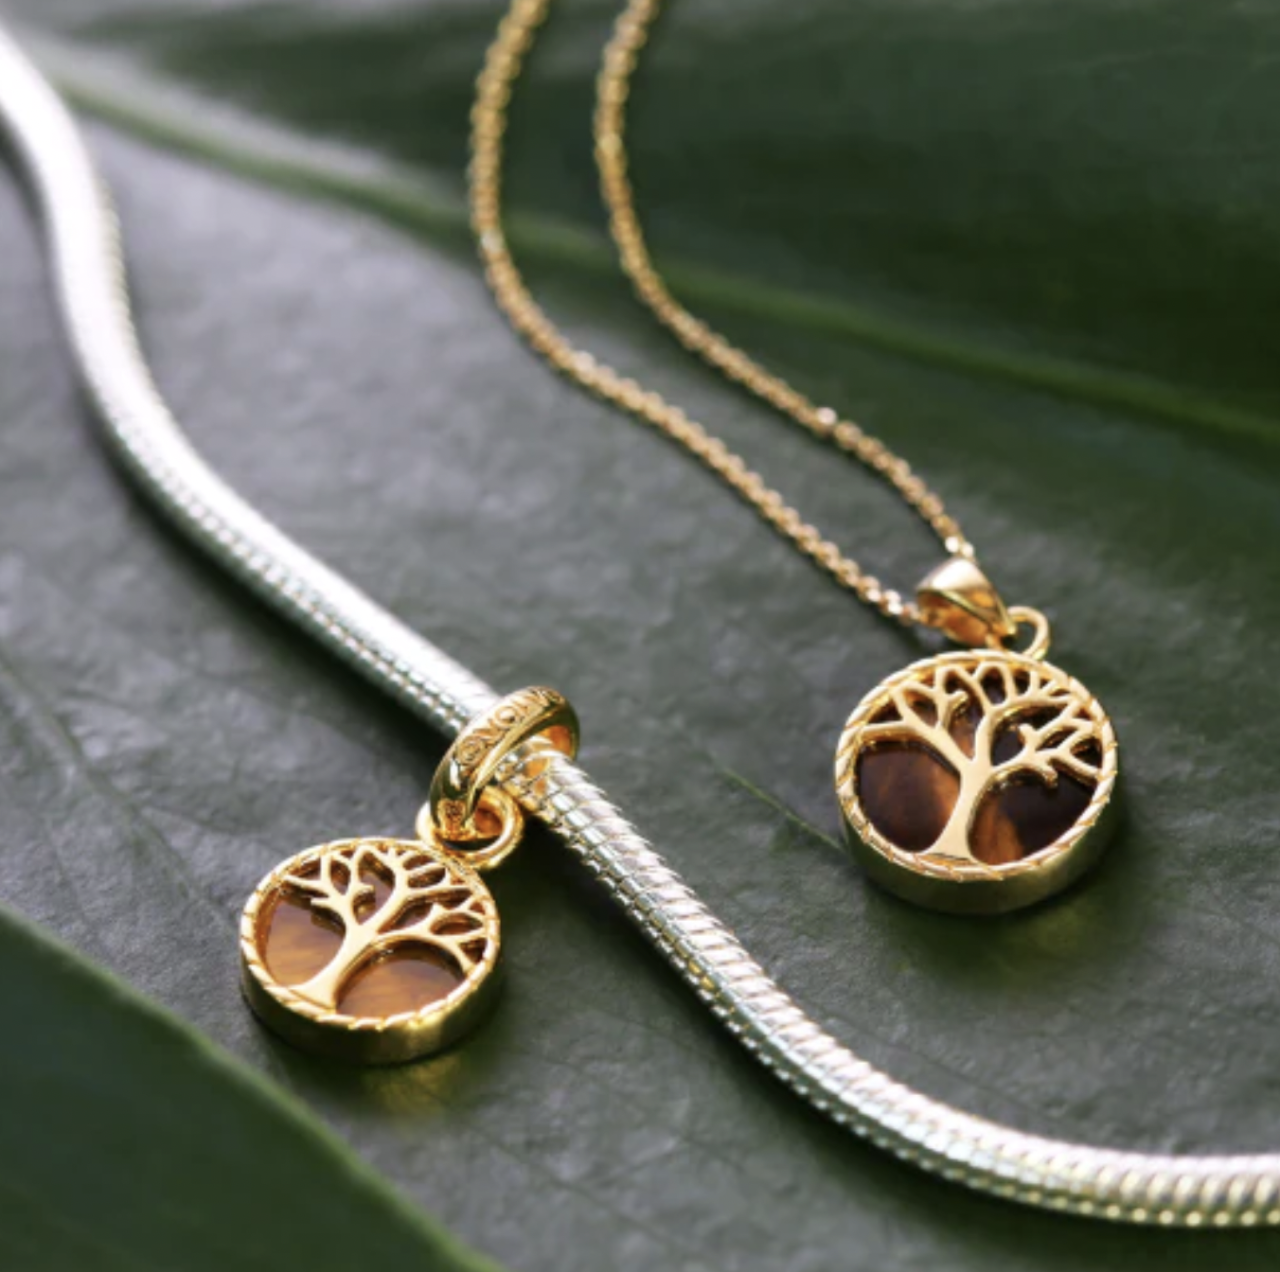 Evolve Tree of Life Necklace Gold Plated (Strength)